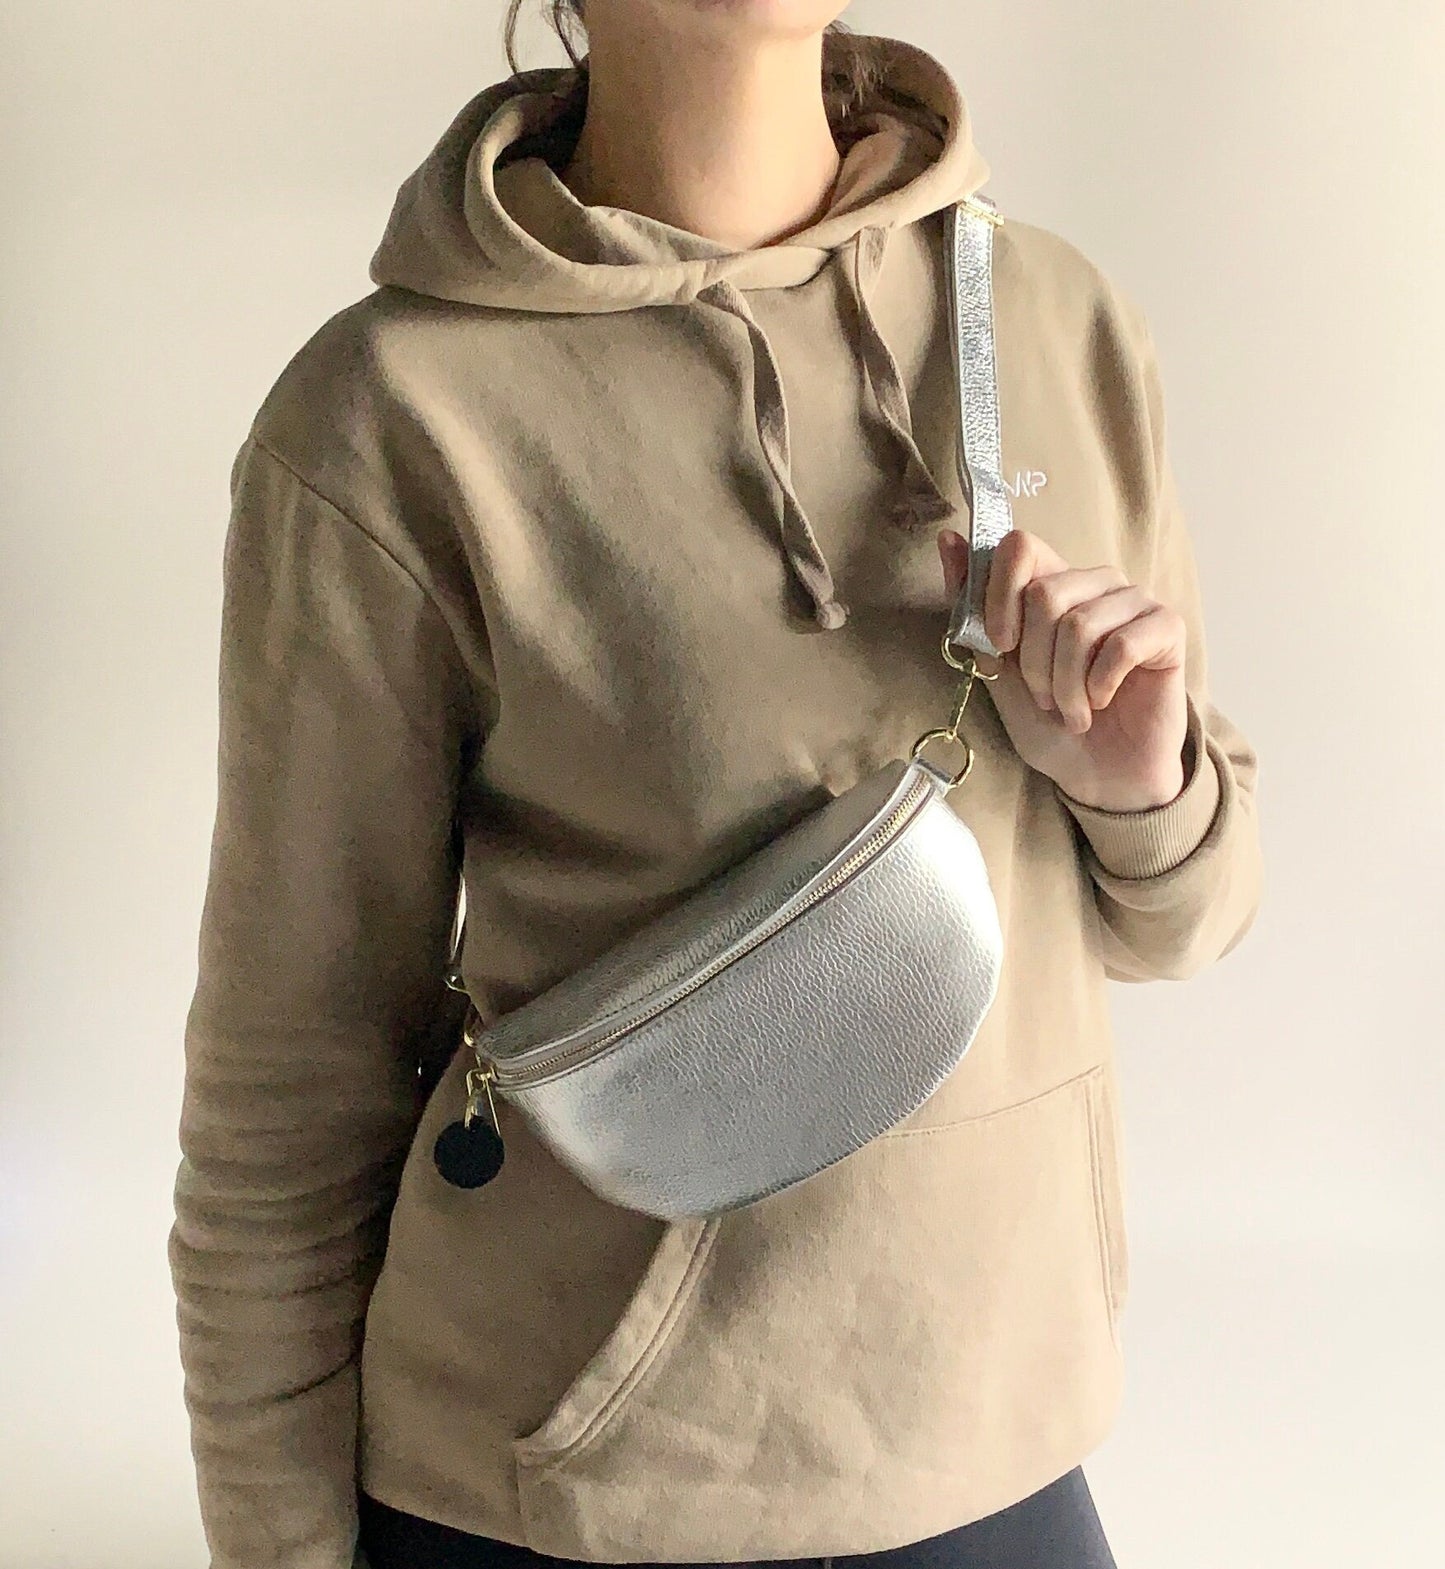 Silver & Gold Leather Body Bag, Gold Fanny Pack Bum Bag, Close to Body Bag, Small Gold Leather Bag, Festival Bag, Women&#39;s Leather Bum Bag